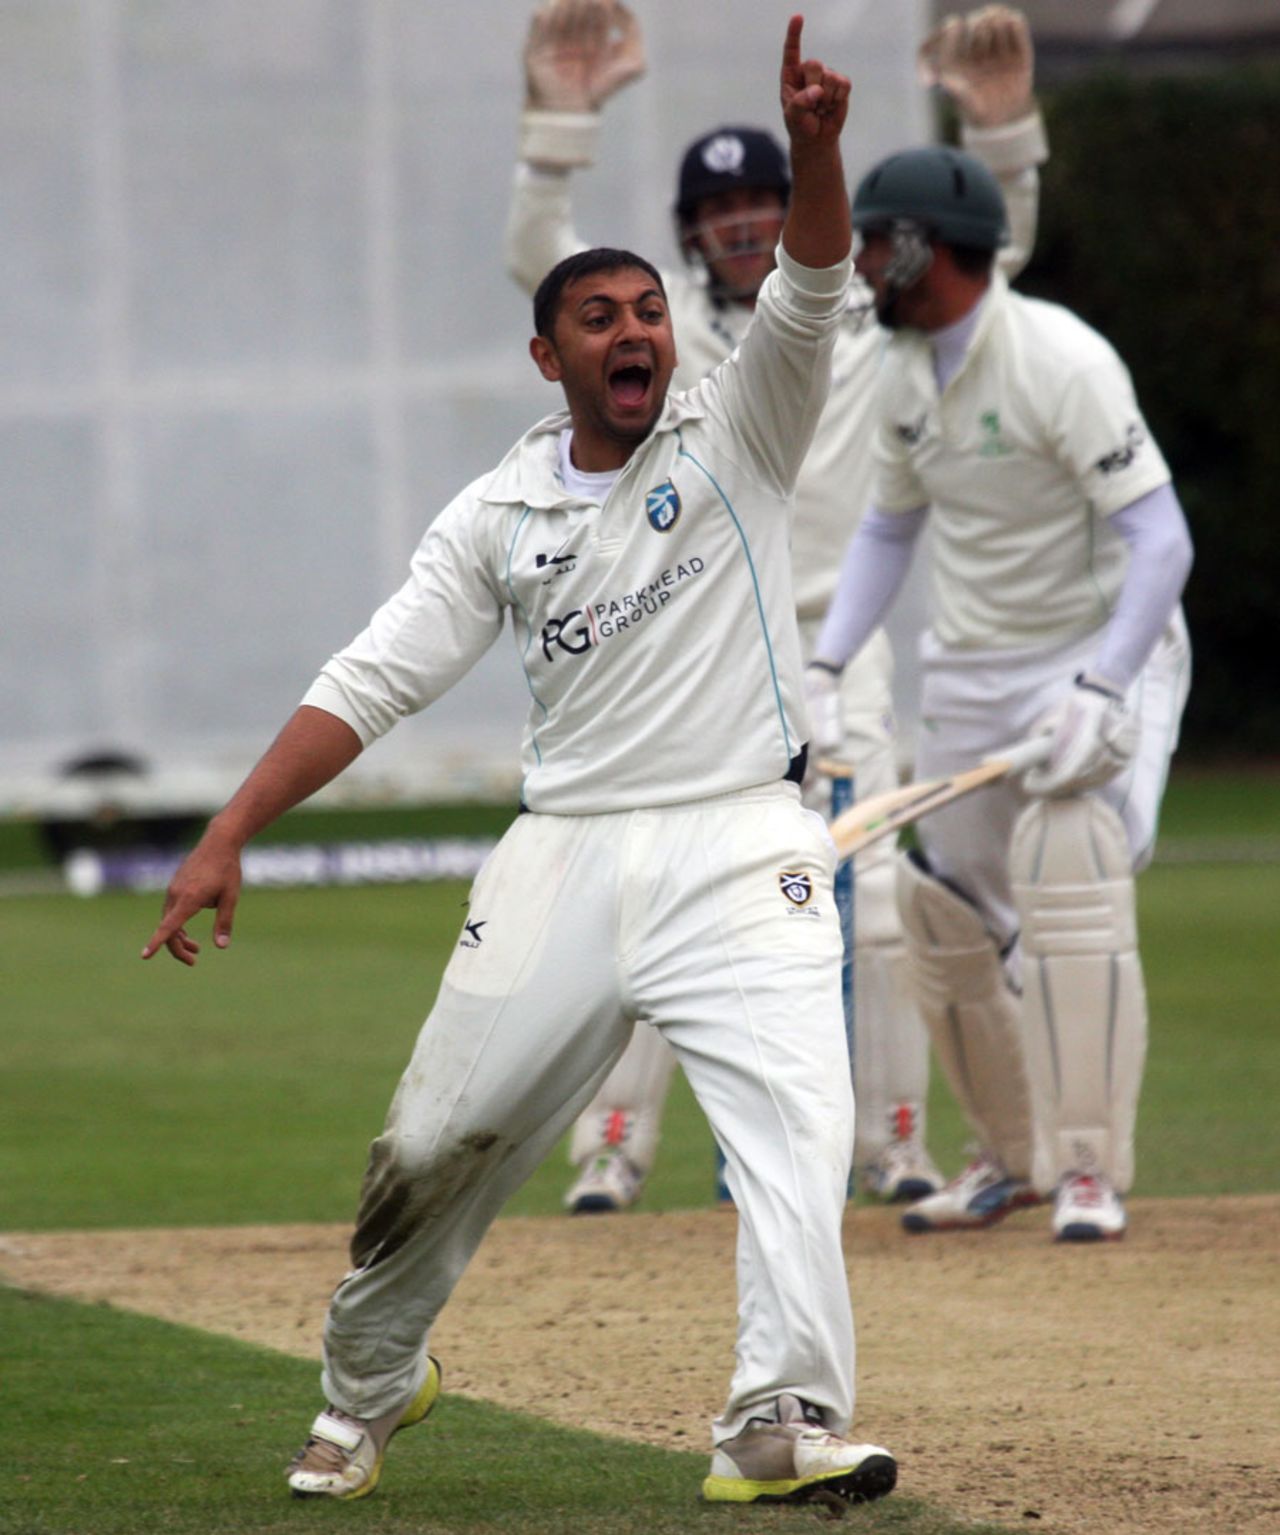 Moneeb Iqbal appeals for a wicket, Ireland v Scotland, ICC Intercontinental Cup, 3rd day, Dublin, September 13, 2013